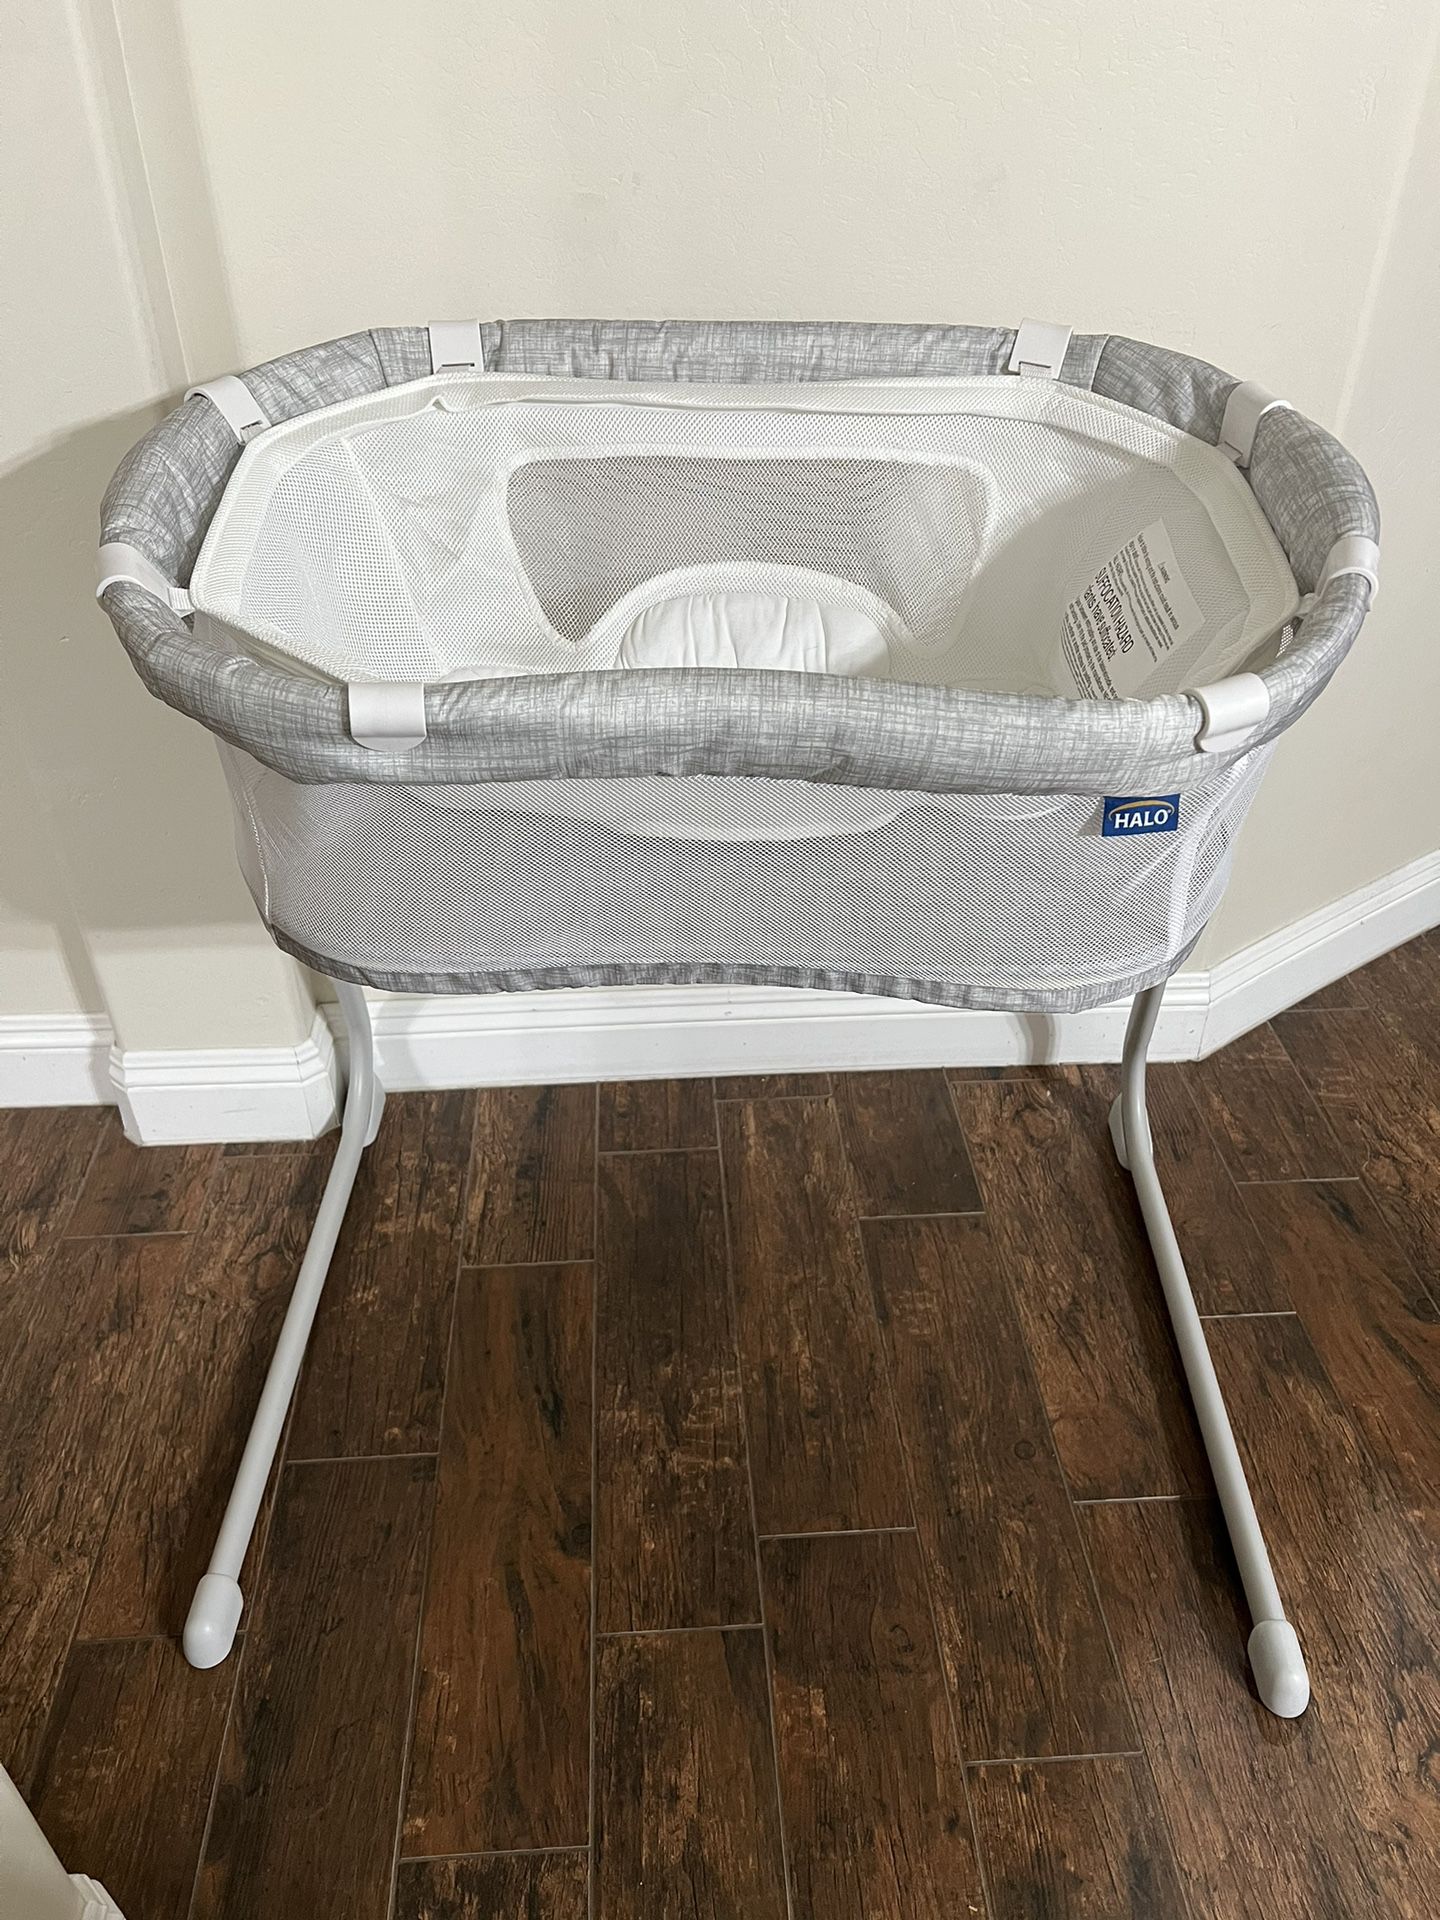 Brand New Halo Bassinet with Snuggle Attachment